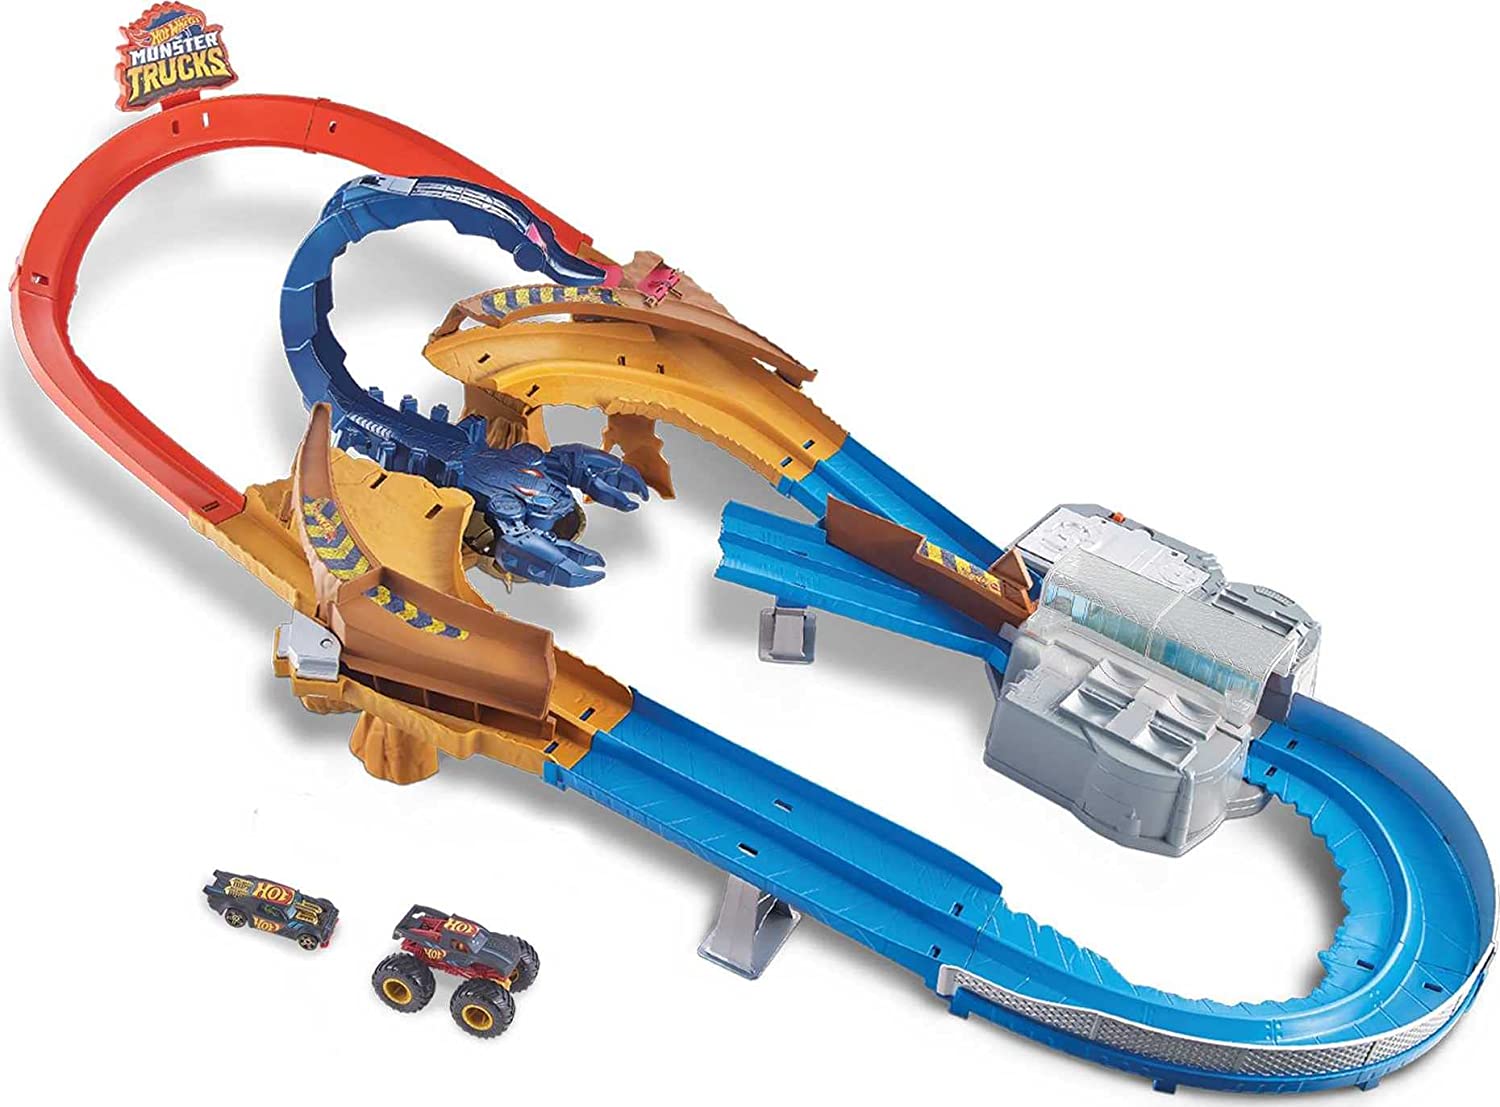 $23.99 At Amazon & Walmart: Hot Wheels Monster Trucks Scorpion Raceway Boosted Set with Monster Truck and Hot Wheels car and Giant Scorpion Nemesis.